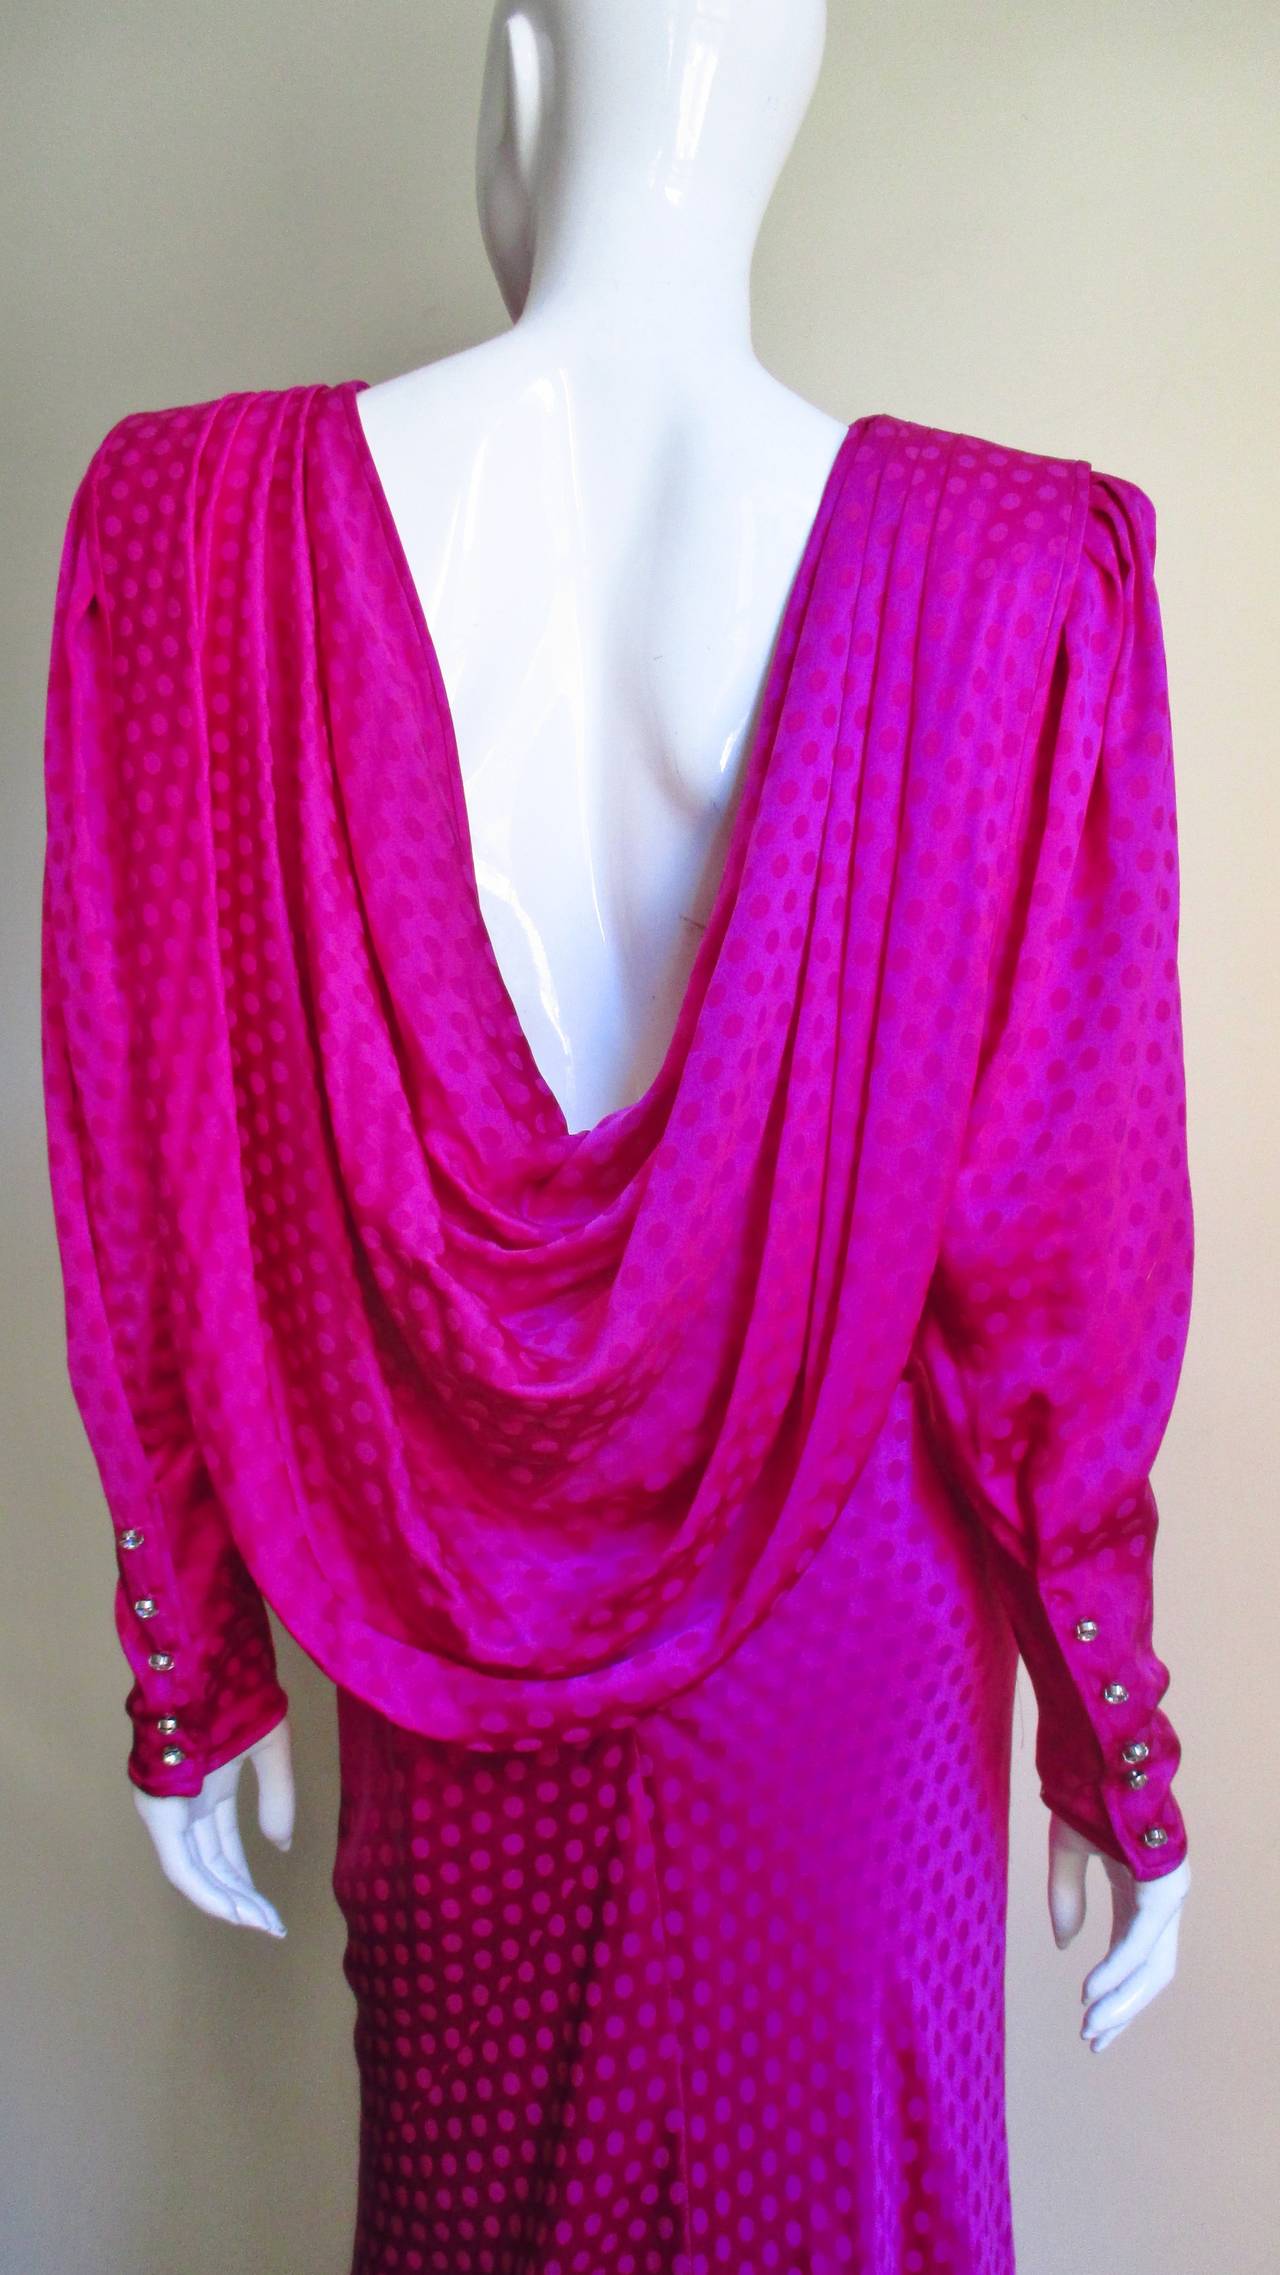 Dramatic and beautiful vibrant fuchsia silk dress with a subtly embossed dot pattern from Emanuel Ungaro Parallele. Simple padded shoulders long sheath from the front.  The low cut back is surrounded by folds of weighted draping to the hips and has